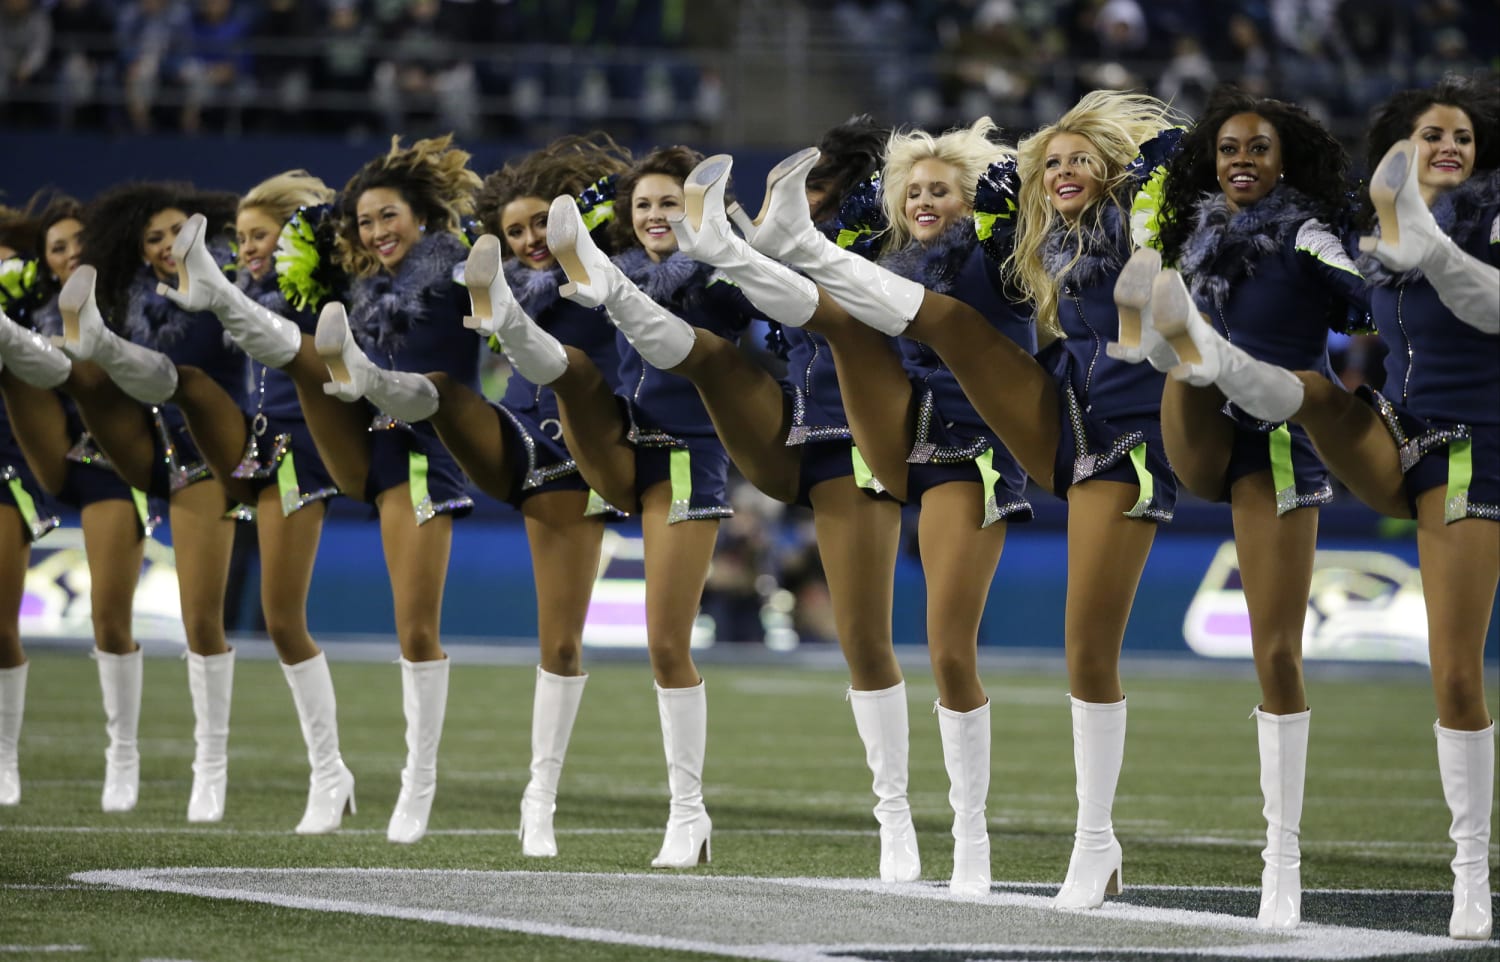 seahawks cheerleading outfit